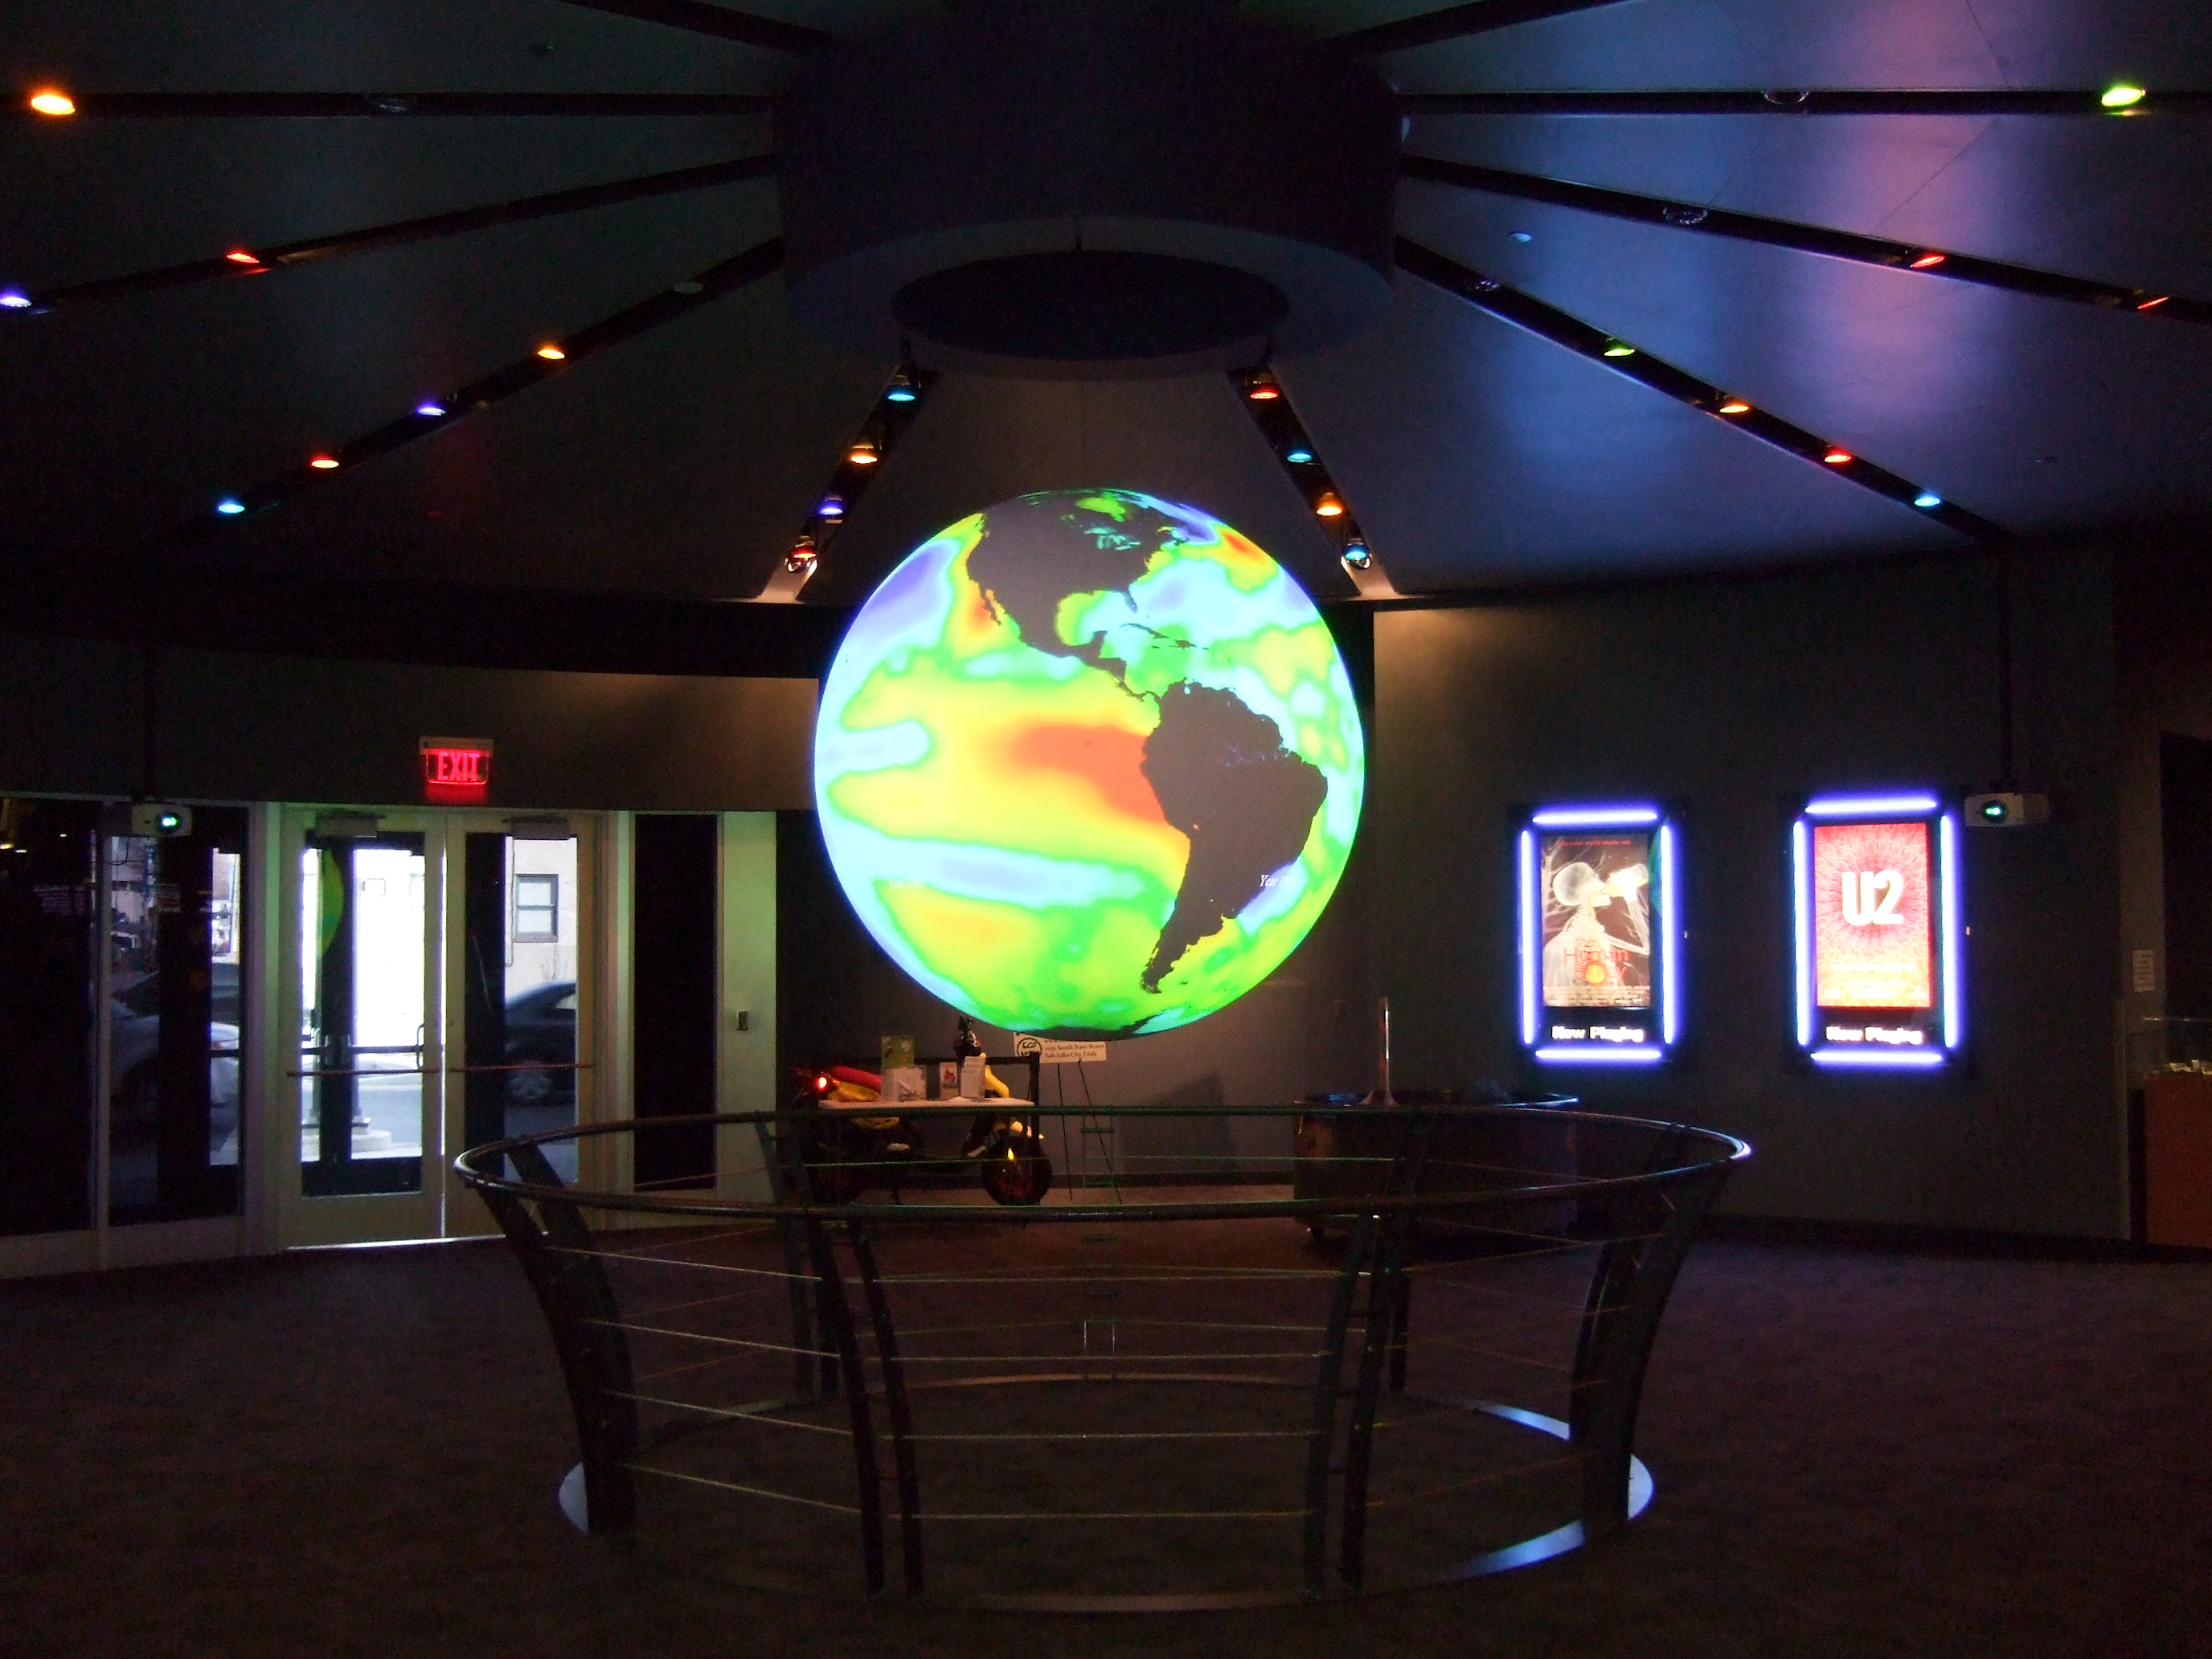 Science On a Sphere hangs in the center of a lobby displaying ocean data in hues of red, yellow, green, and blue